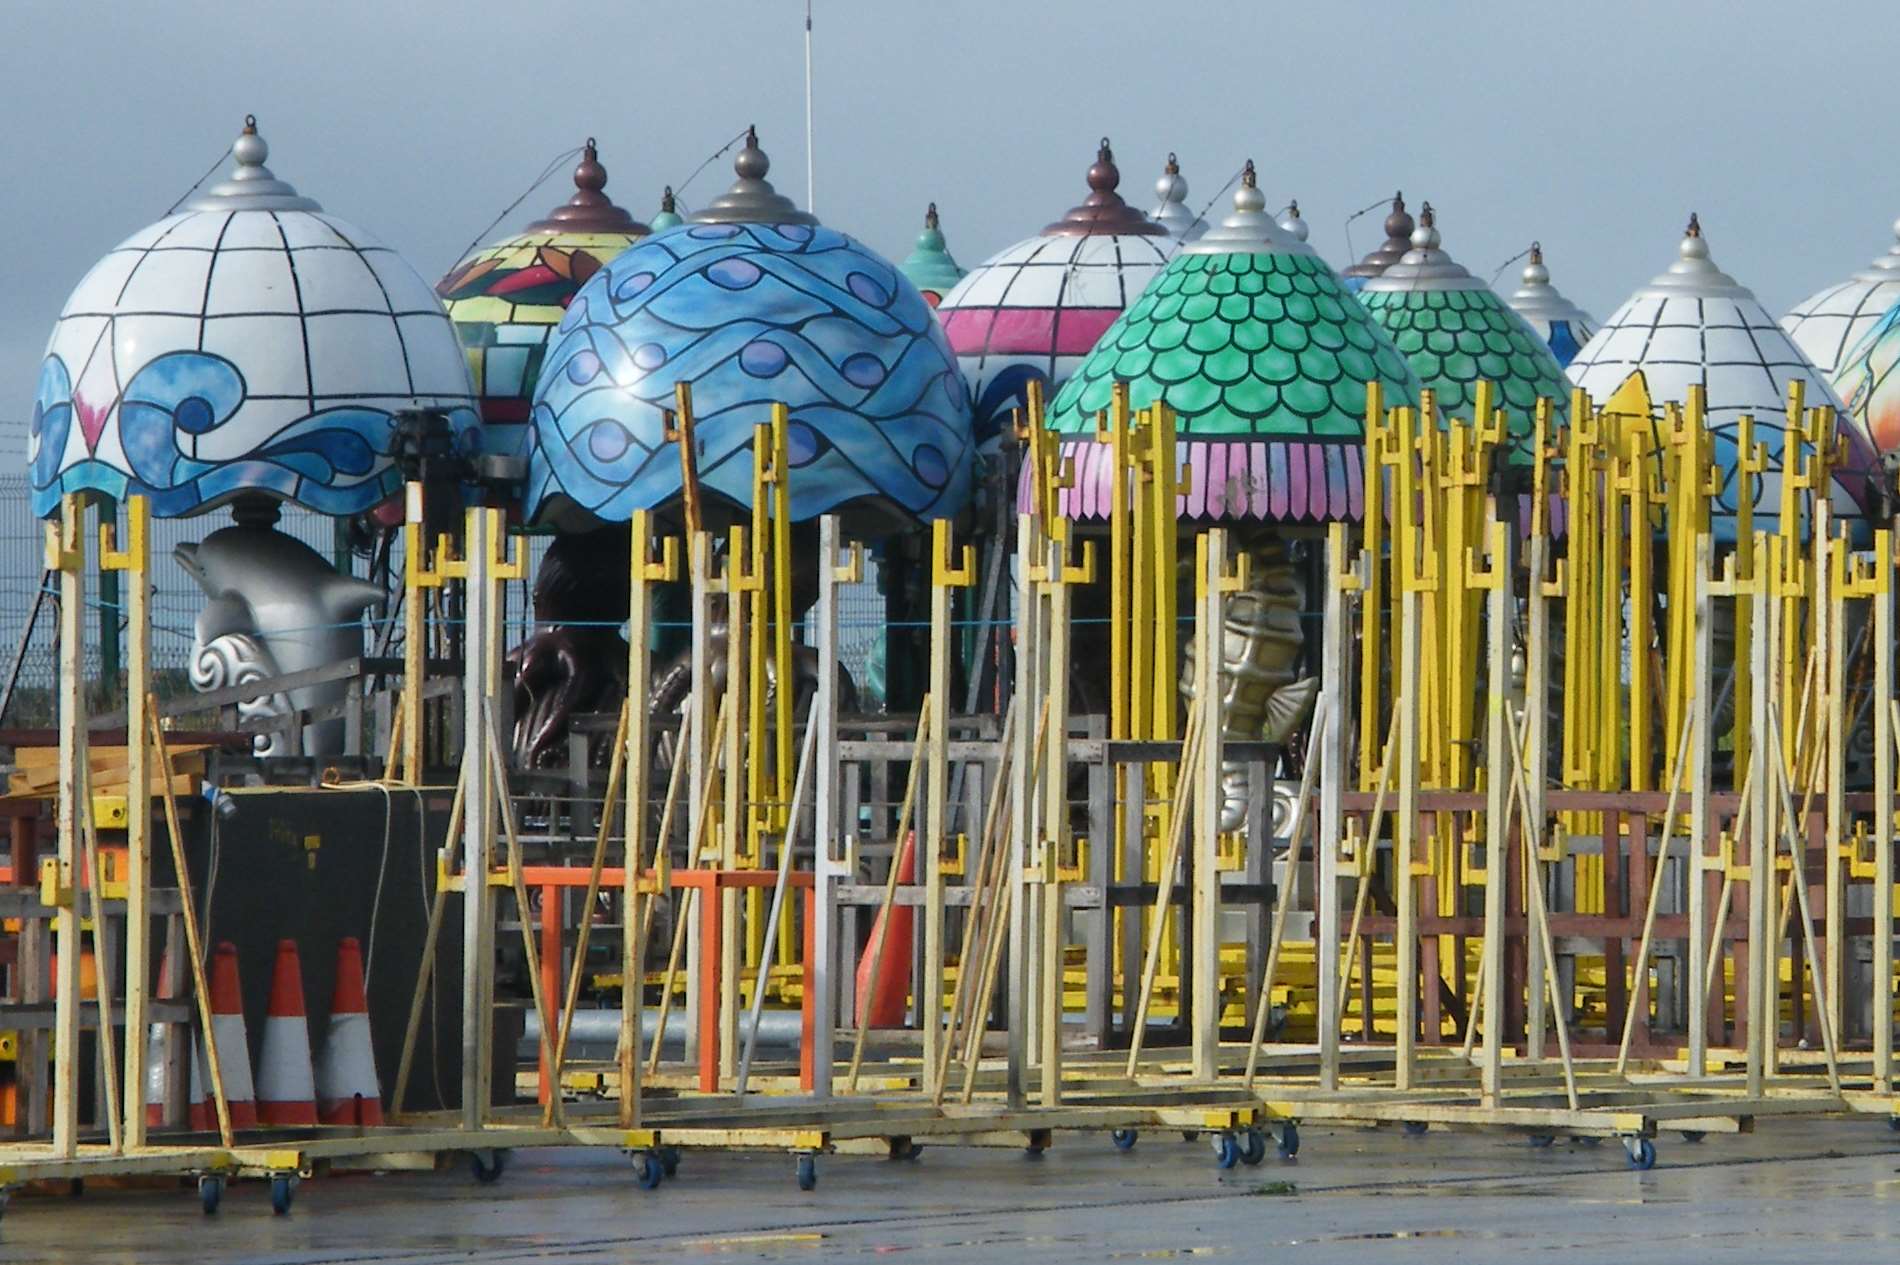 Blackpool Illuminations which have been donated to Dreamland